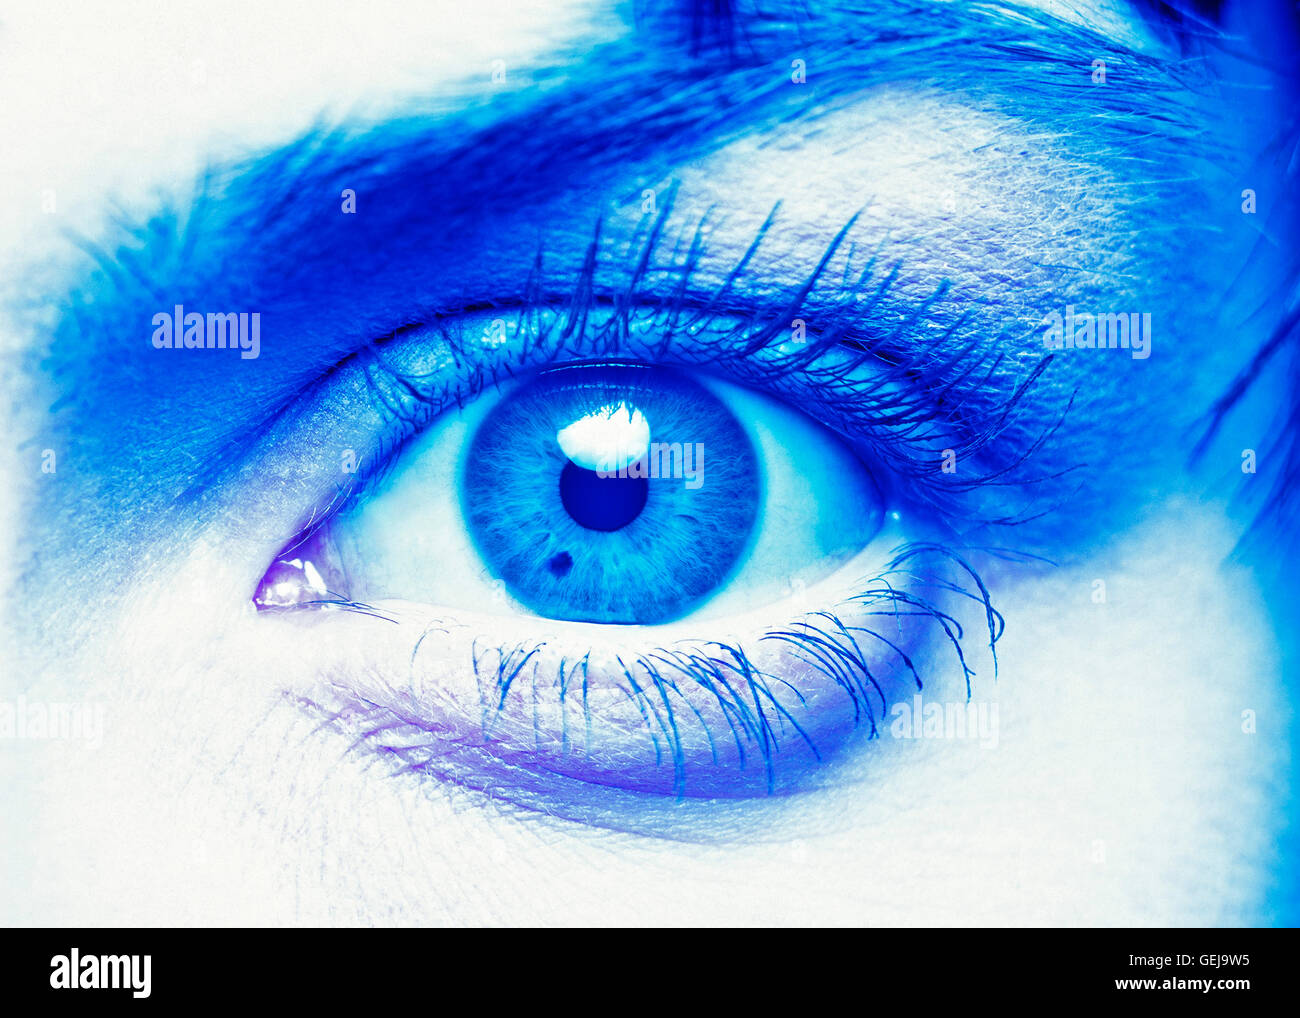 A very close-up shot of a single women's eye with a monochromatic blue tone Stock Photo